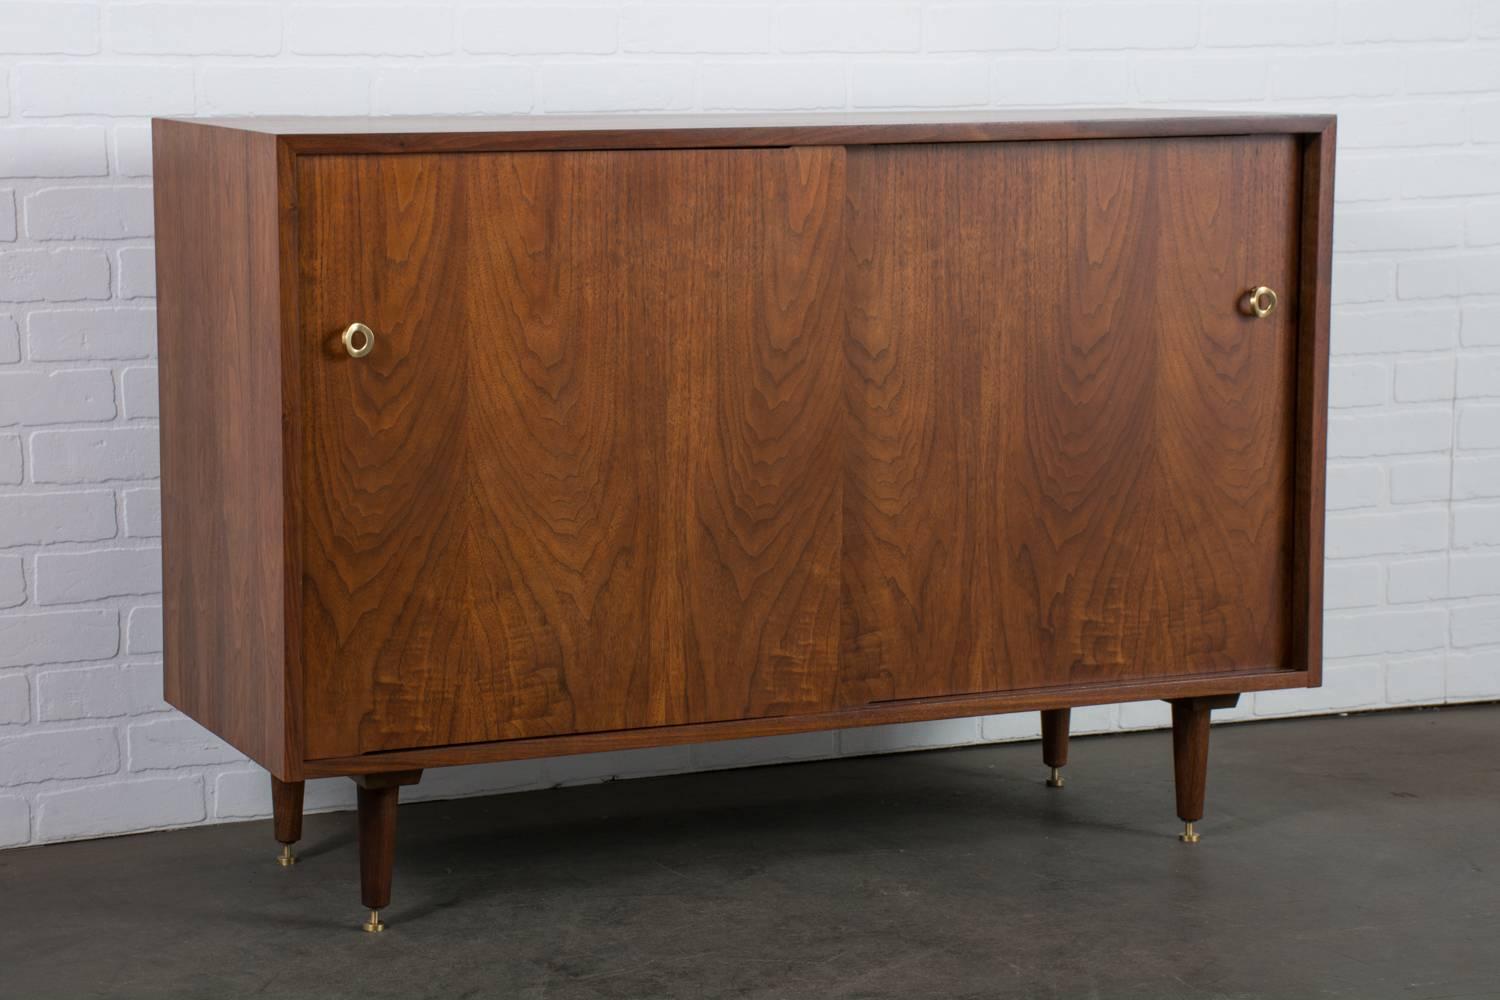 This vintage Mid-Century walnut credenza was designed by Greta Grossman for Glenn of California in the 1950's. It features two sliding doors that conceal one adjustable shelf on the left and four orange lacquered drawers on the right. Beautiful